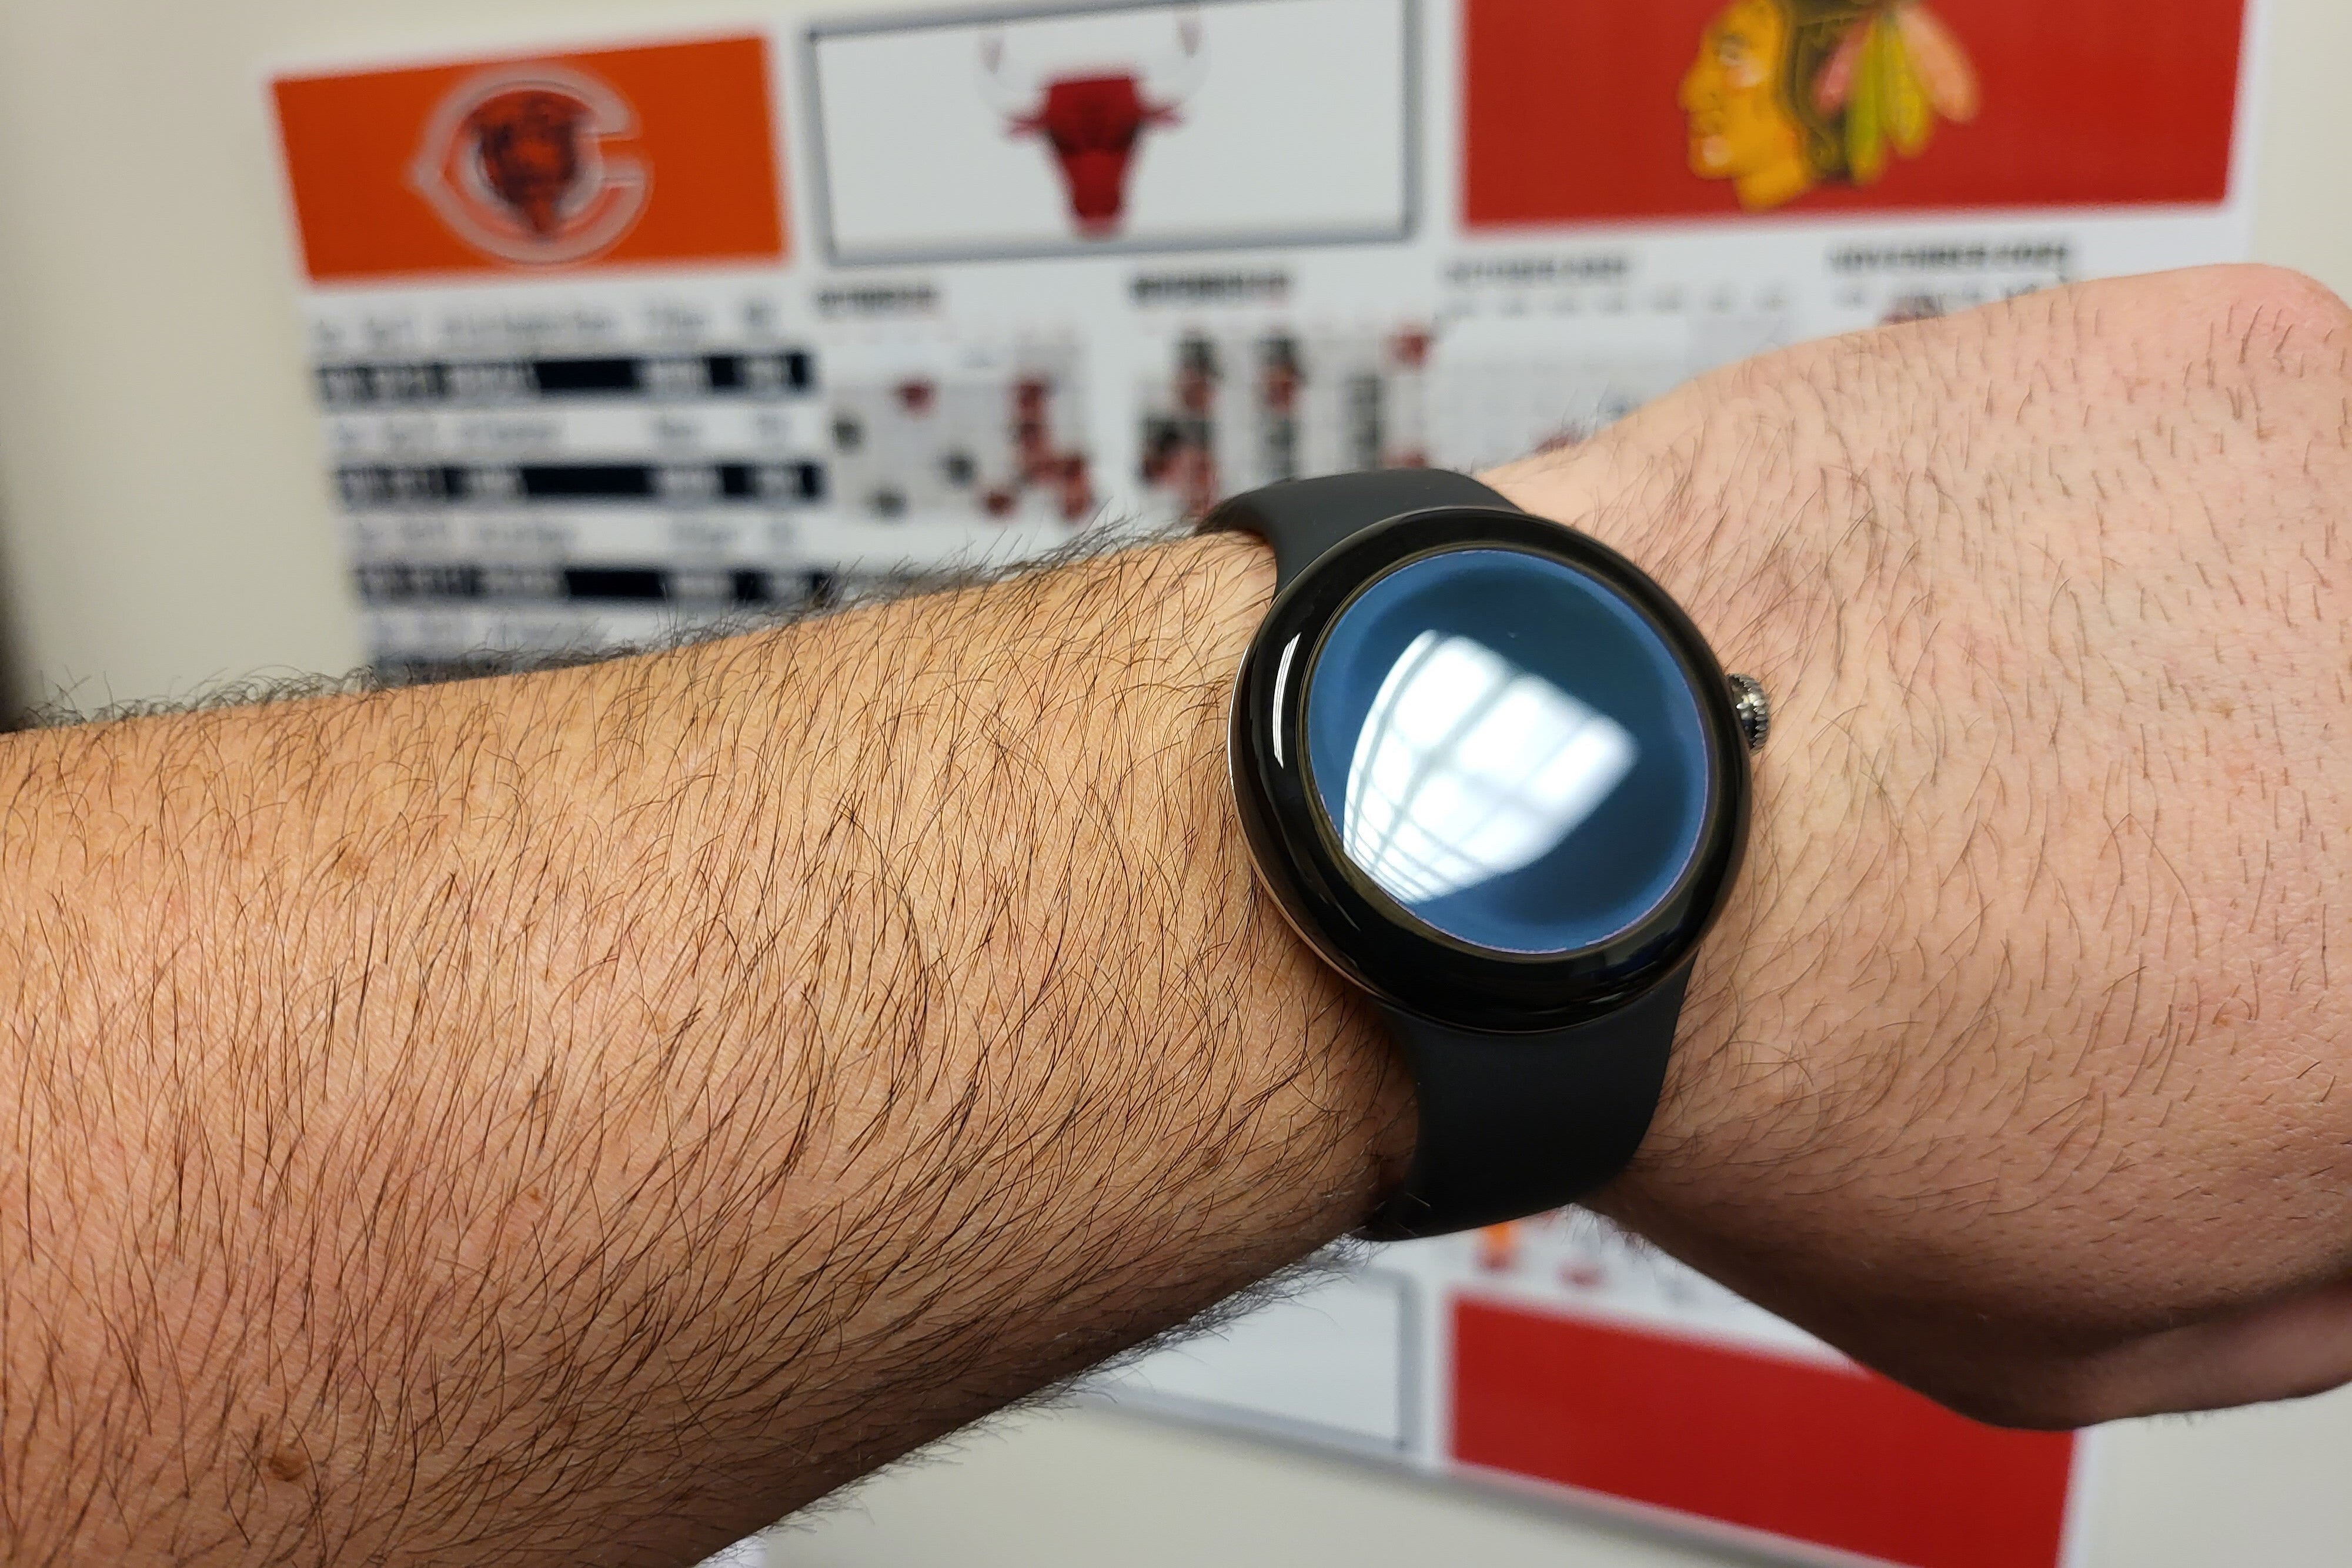 The Pixel Watch prototype has run out of charge - Redditor finally tries on Pixel Watch, says it's the 'most comfortable watch'